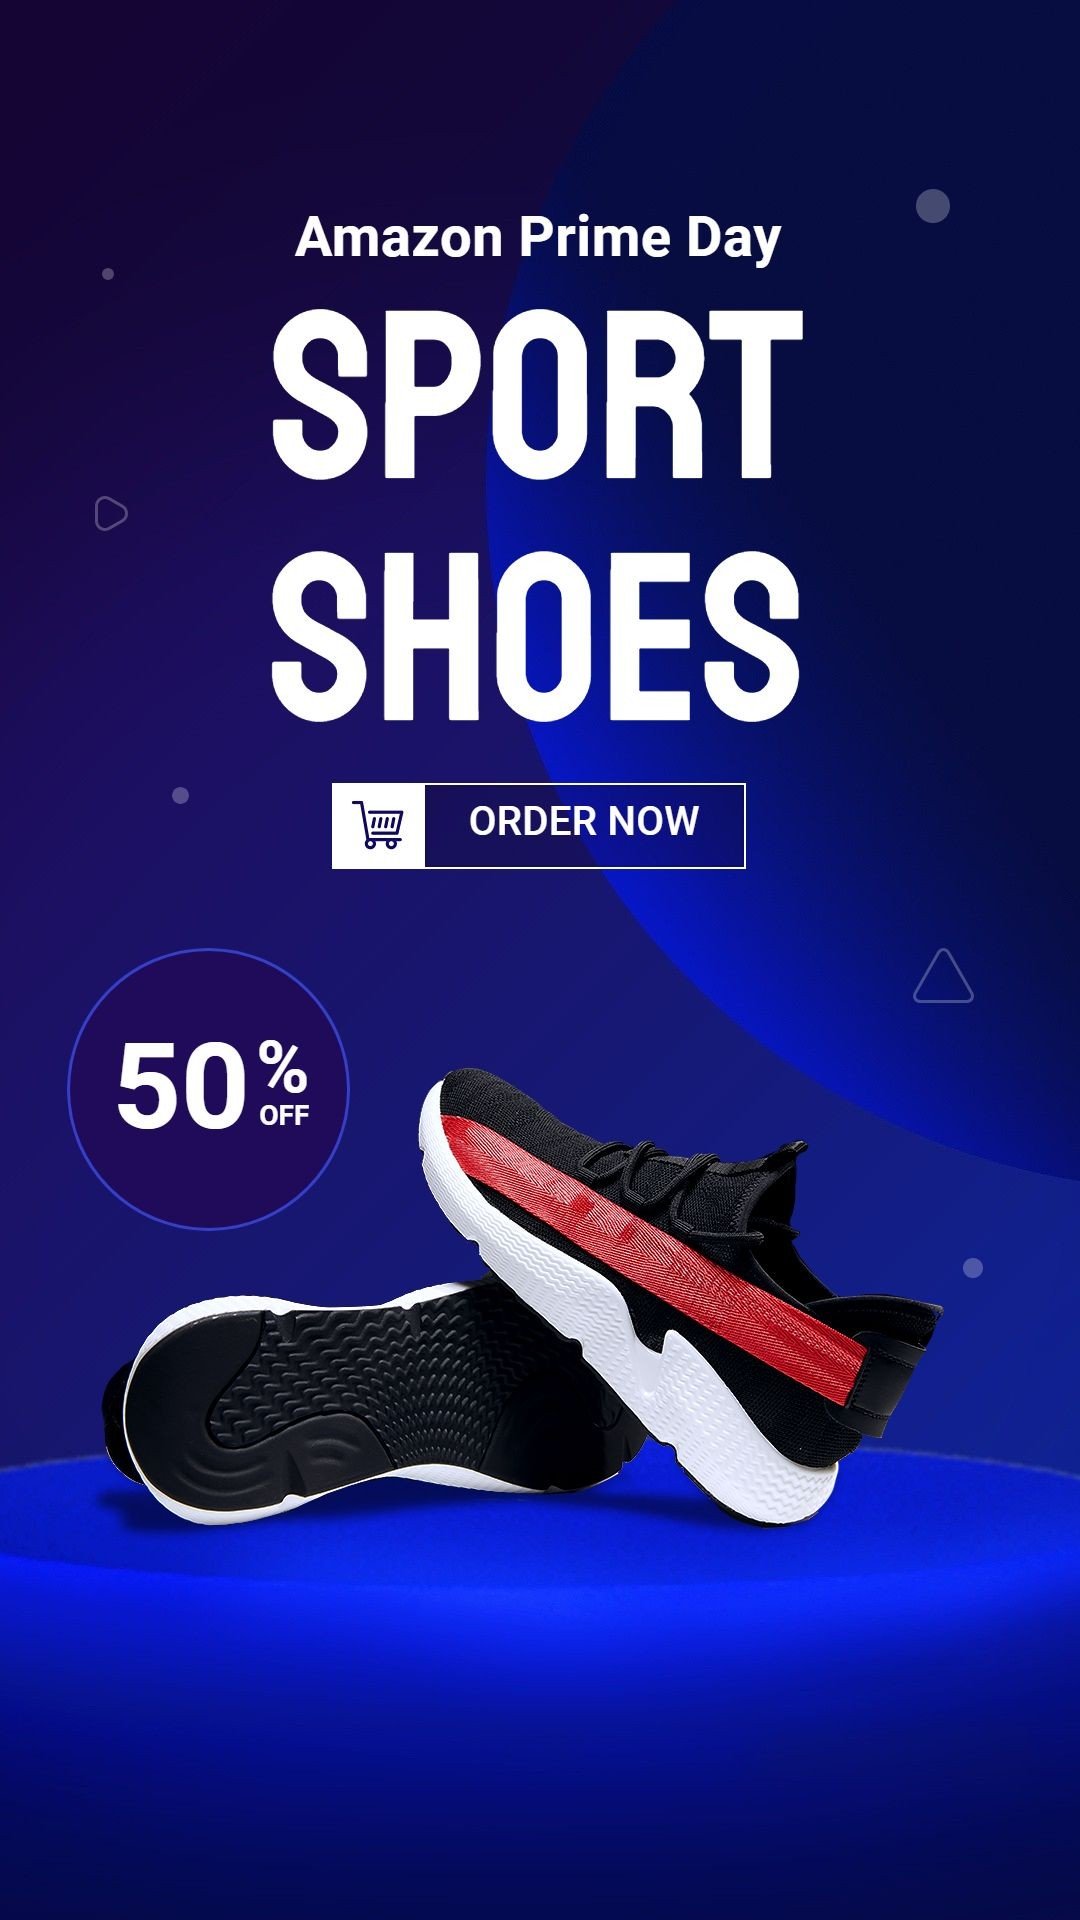 Amazon Prime Day Sports Running Shoes Discount Sale Promotion Ecommerce Story